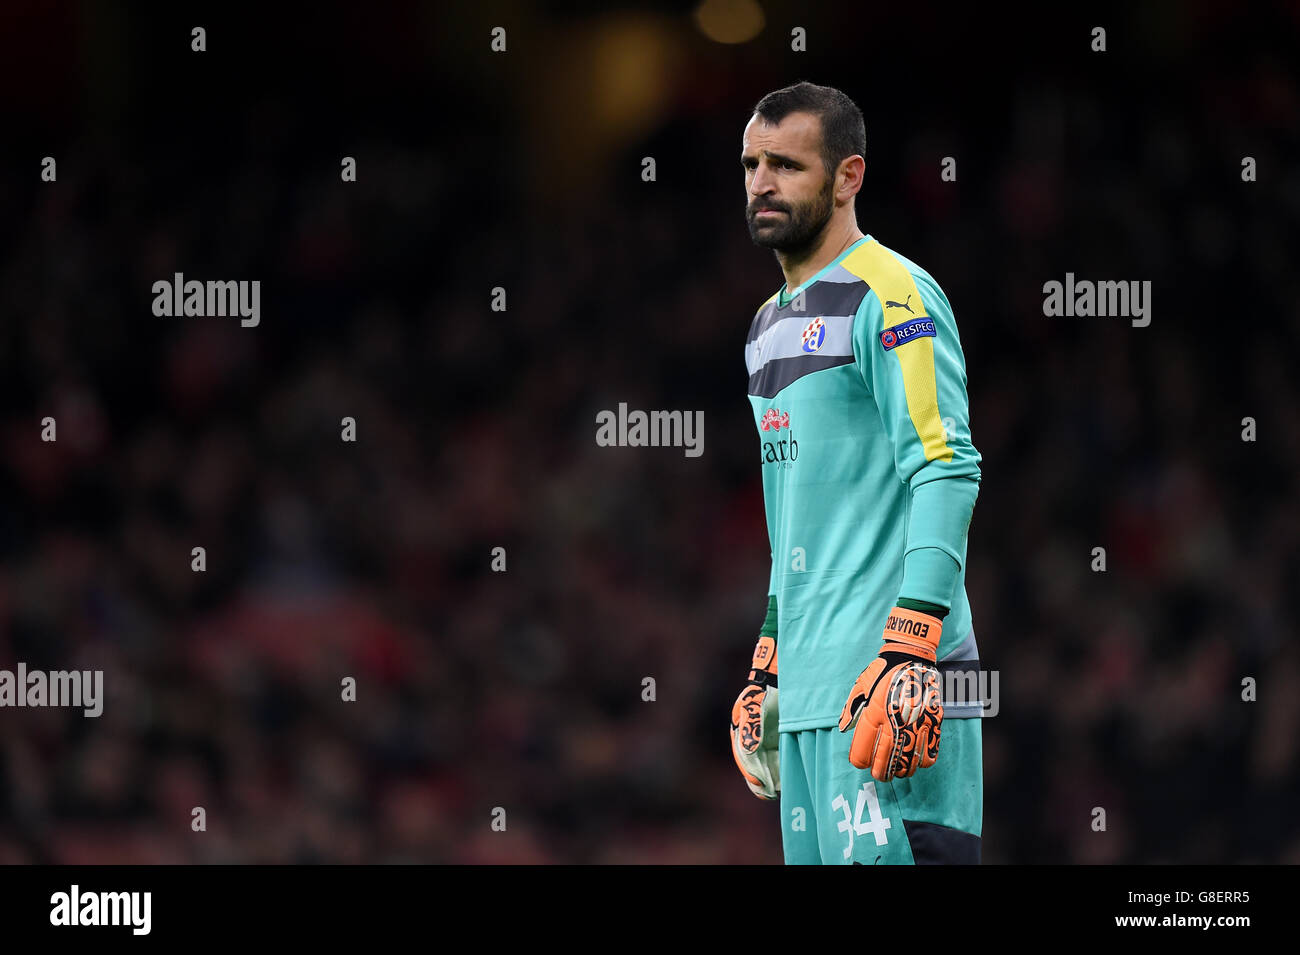 Dinamo Zagreb goalkeeper Eduardo during the UEFA Champions League, Group F match at The Emirates Stadium, London. PRESS ASSOCIATION Photo. Picture date: Tuesday November 24, 2015. See PA story SOCCER Arsenal. Photo credit should read: Andrew Matthews/PA Wire. Stock Photo